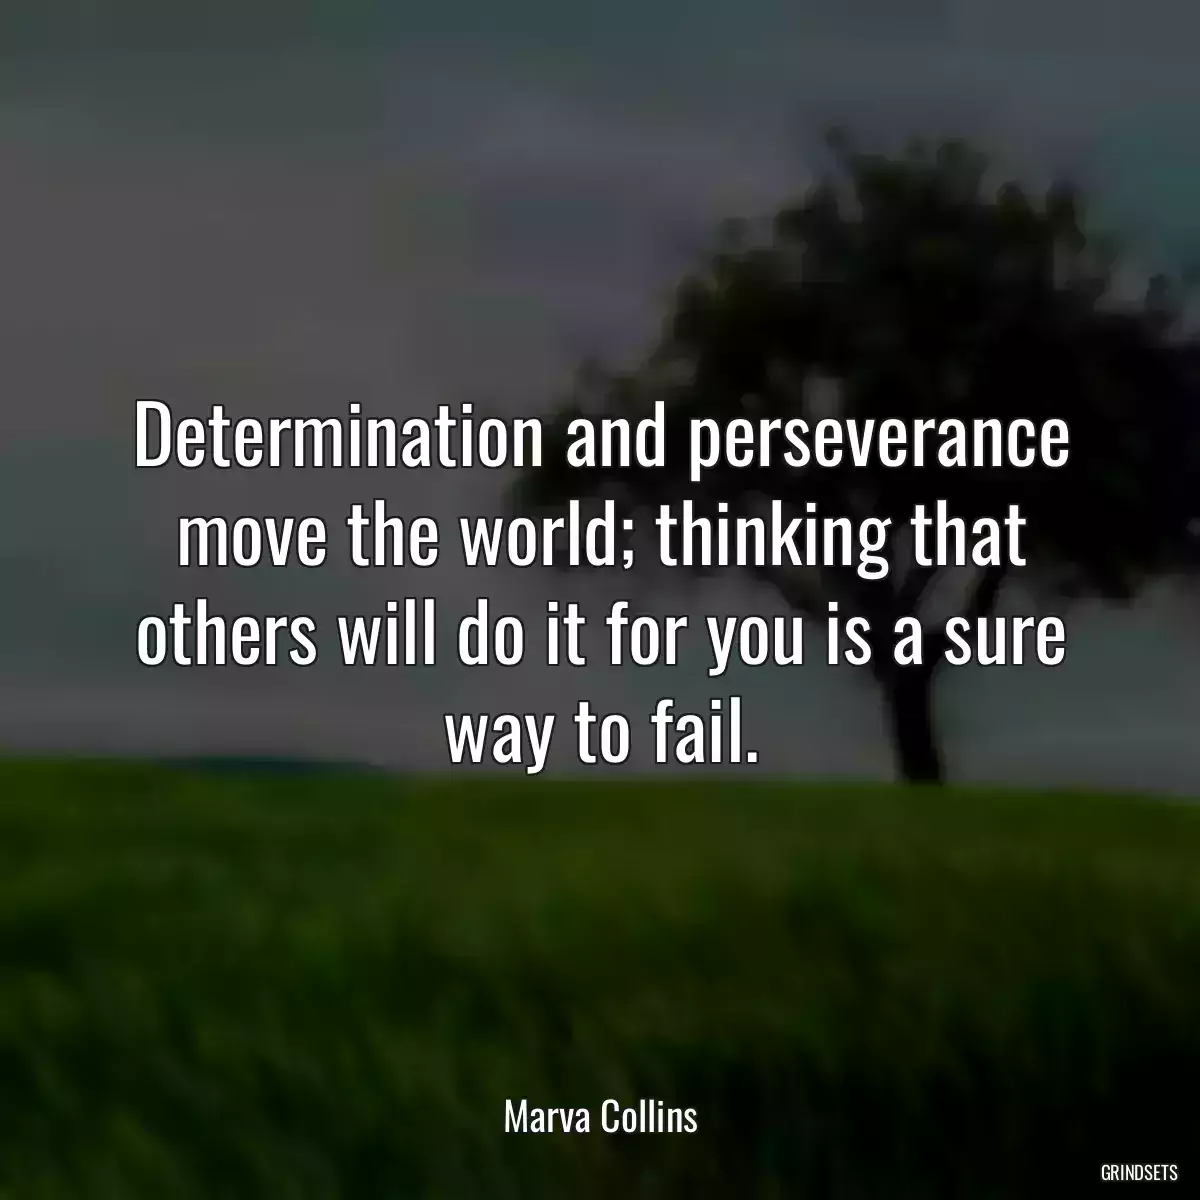 Determination and perseverance move the world; thinking that others will do it for you is a sure way to fail.